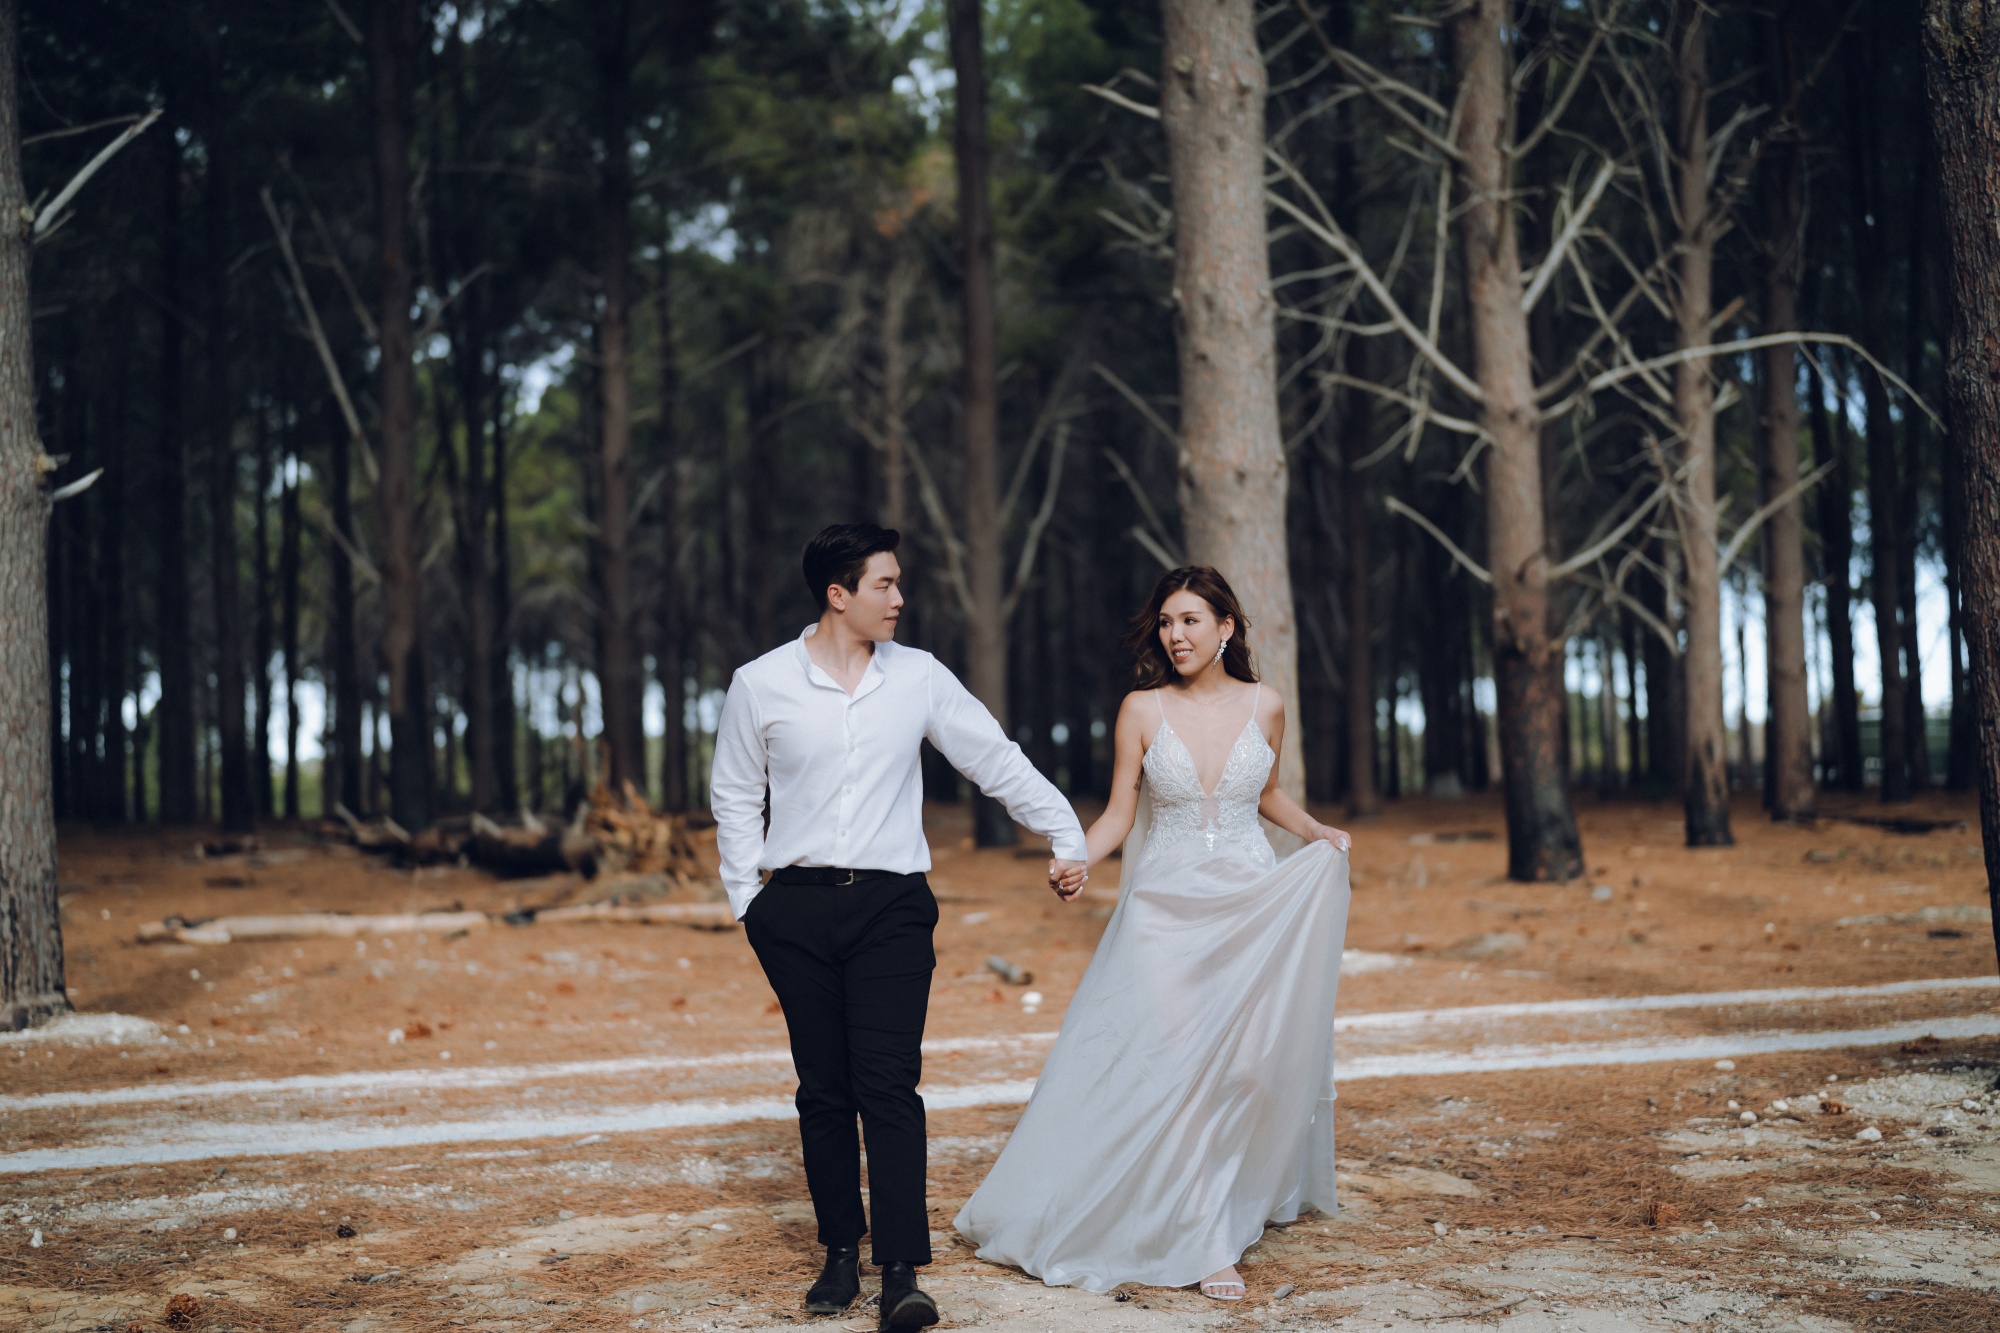 Capturing Forever in Perth: Jasmine & Kamui's Pre-Wedding Story by Jimmy on OneThreeOneFour 7